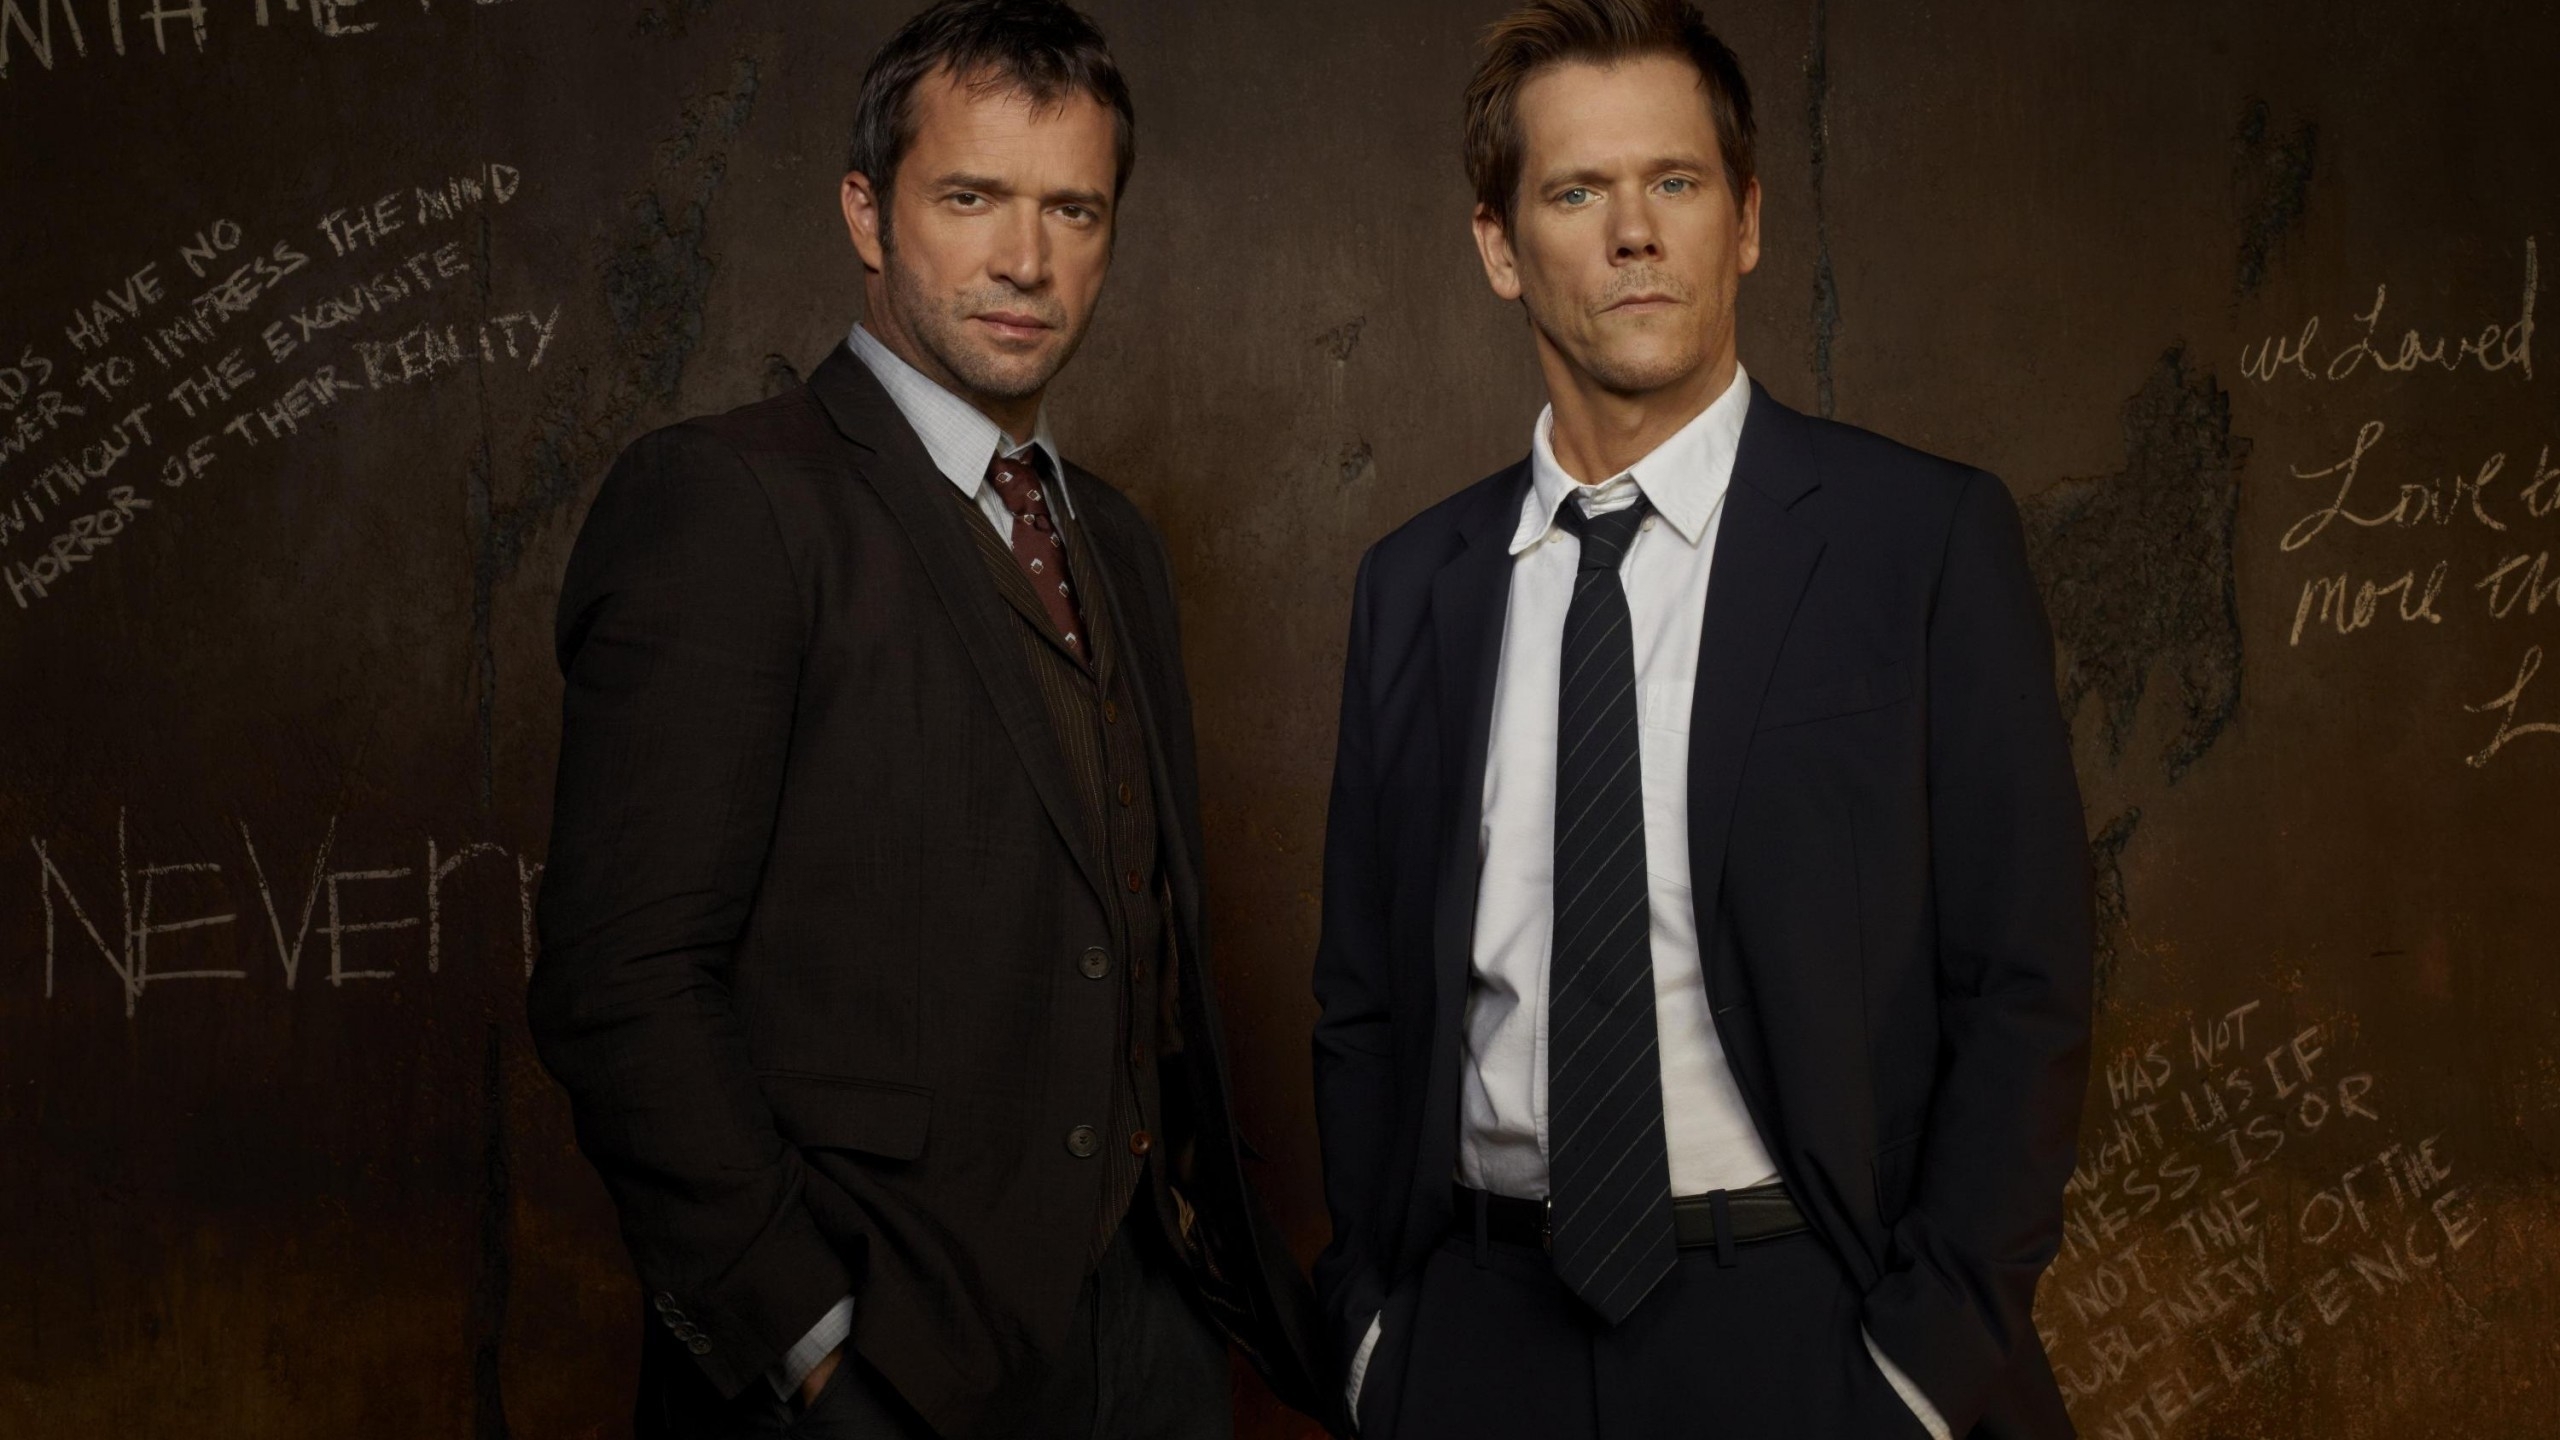 Kevin Bacon and James Purefoy for 2560x1440 HDTV resolution